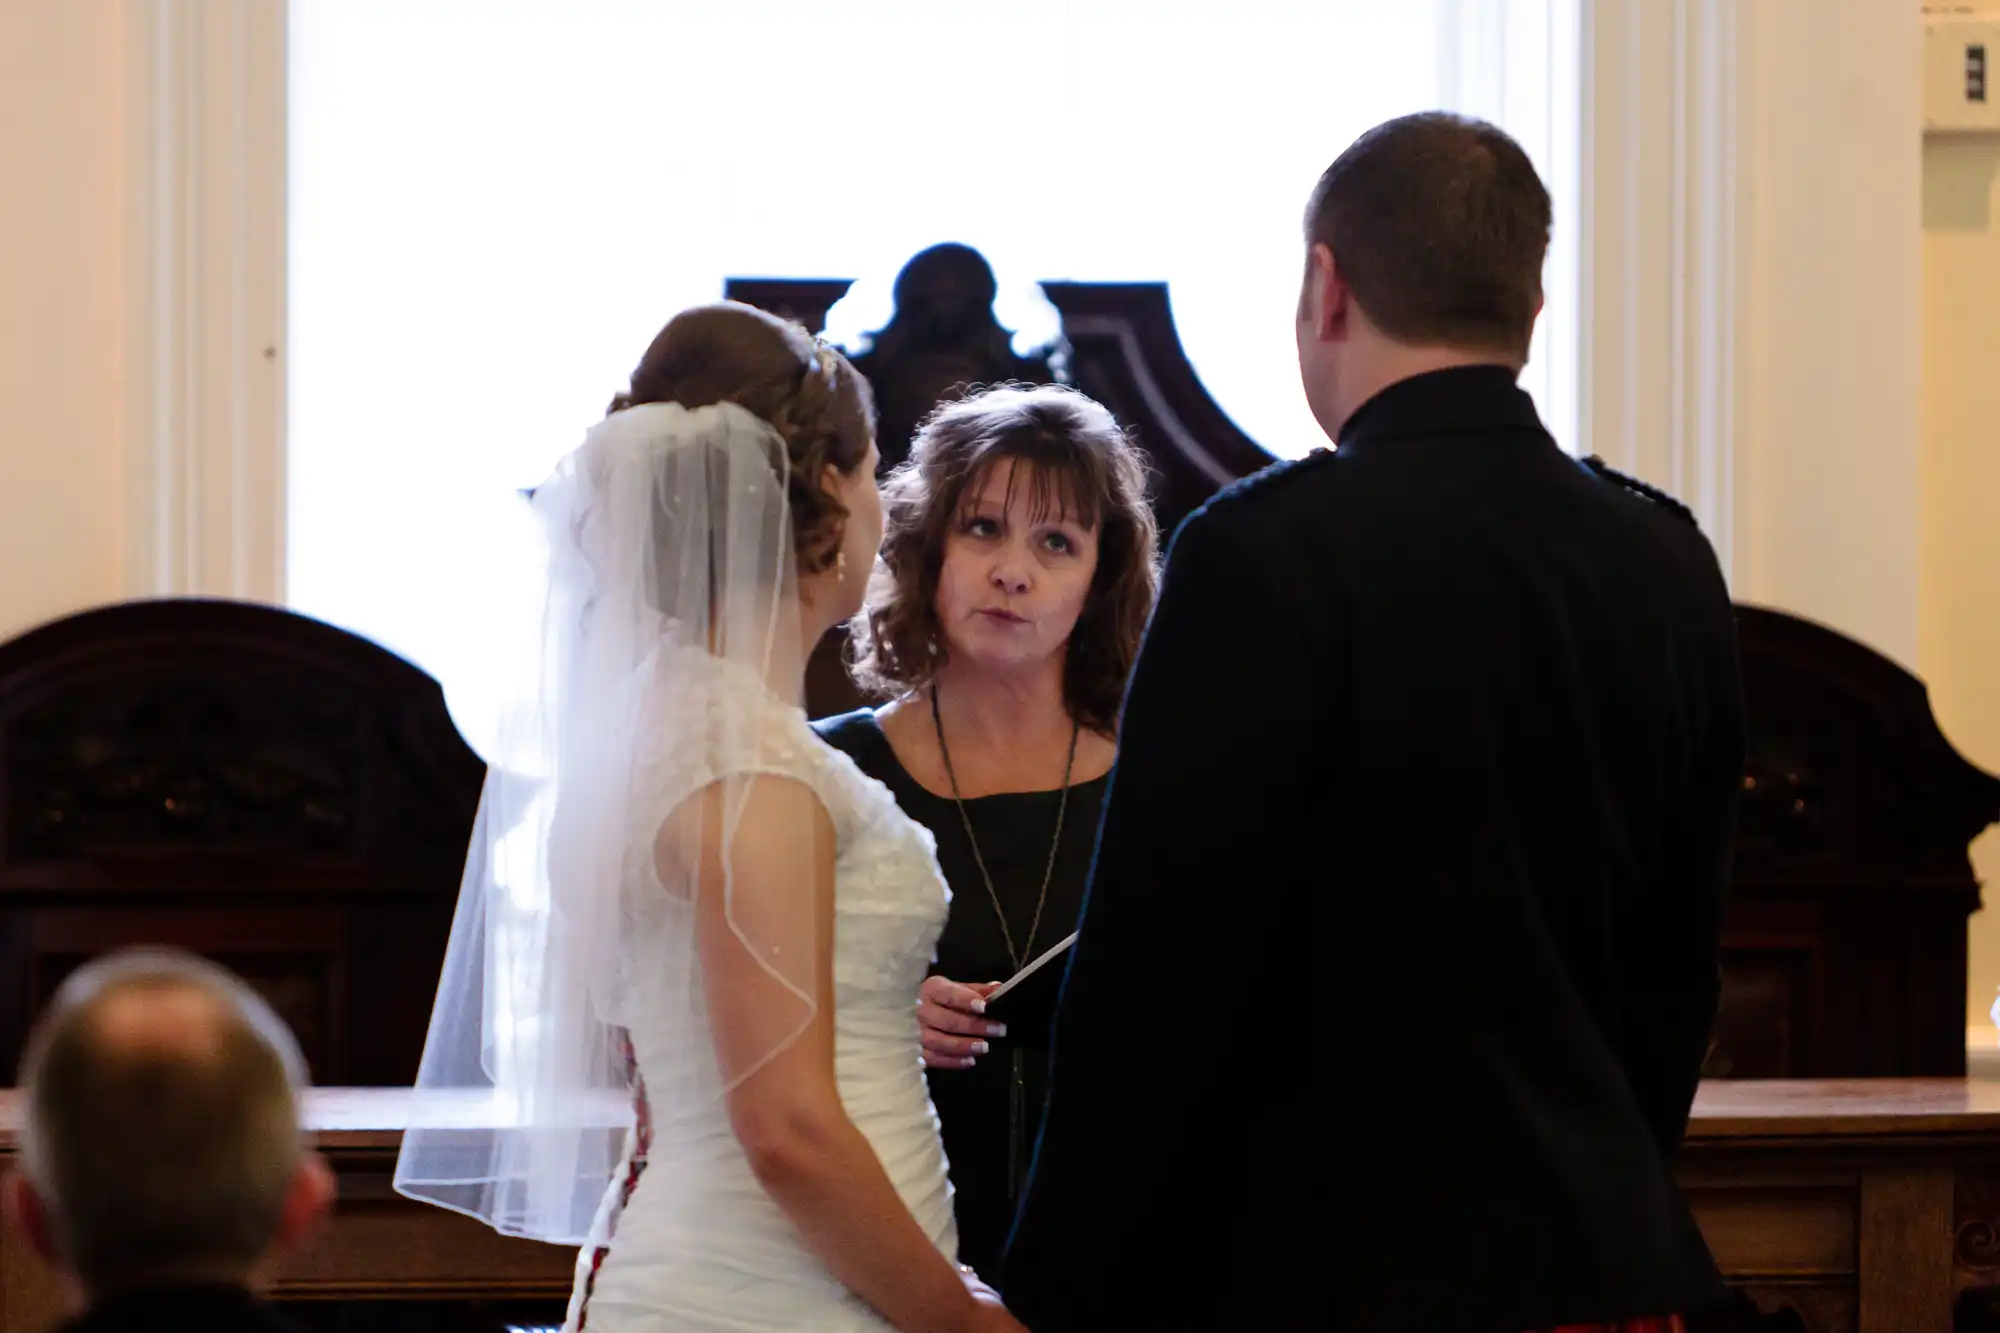 A wedding officiant looks at a bride and groom during a ceremony in an ornate room, viewed from behind the couple.